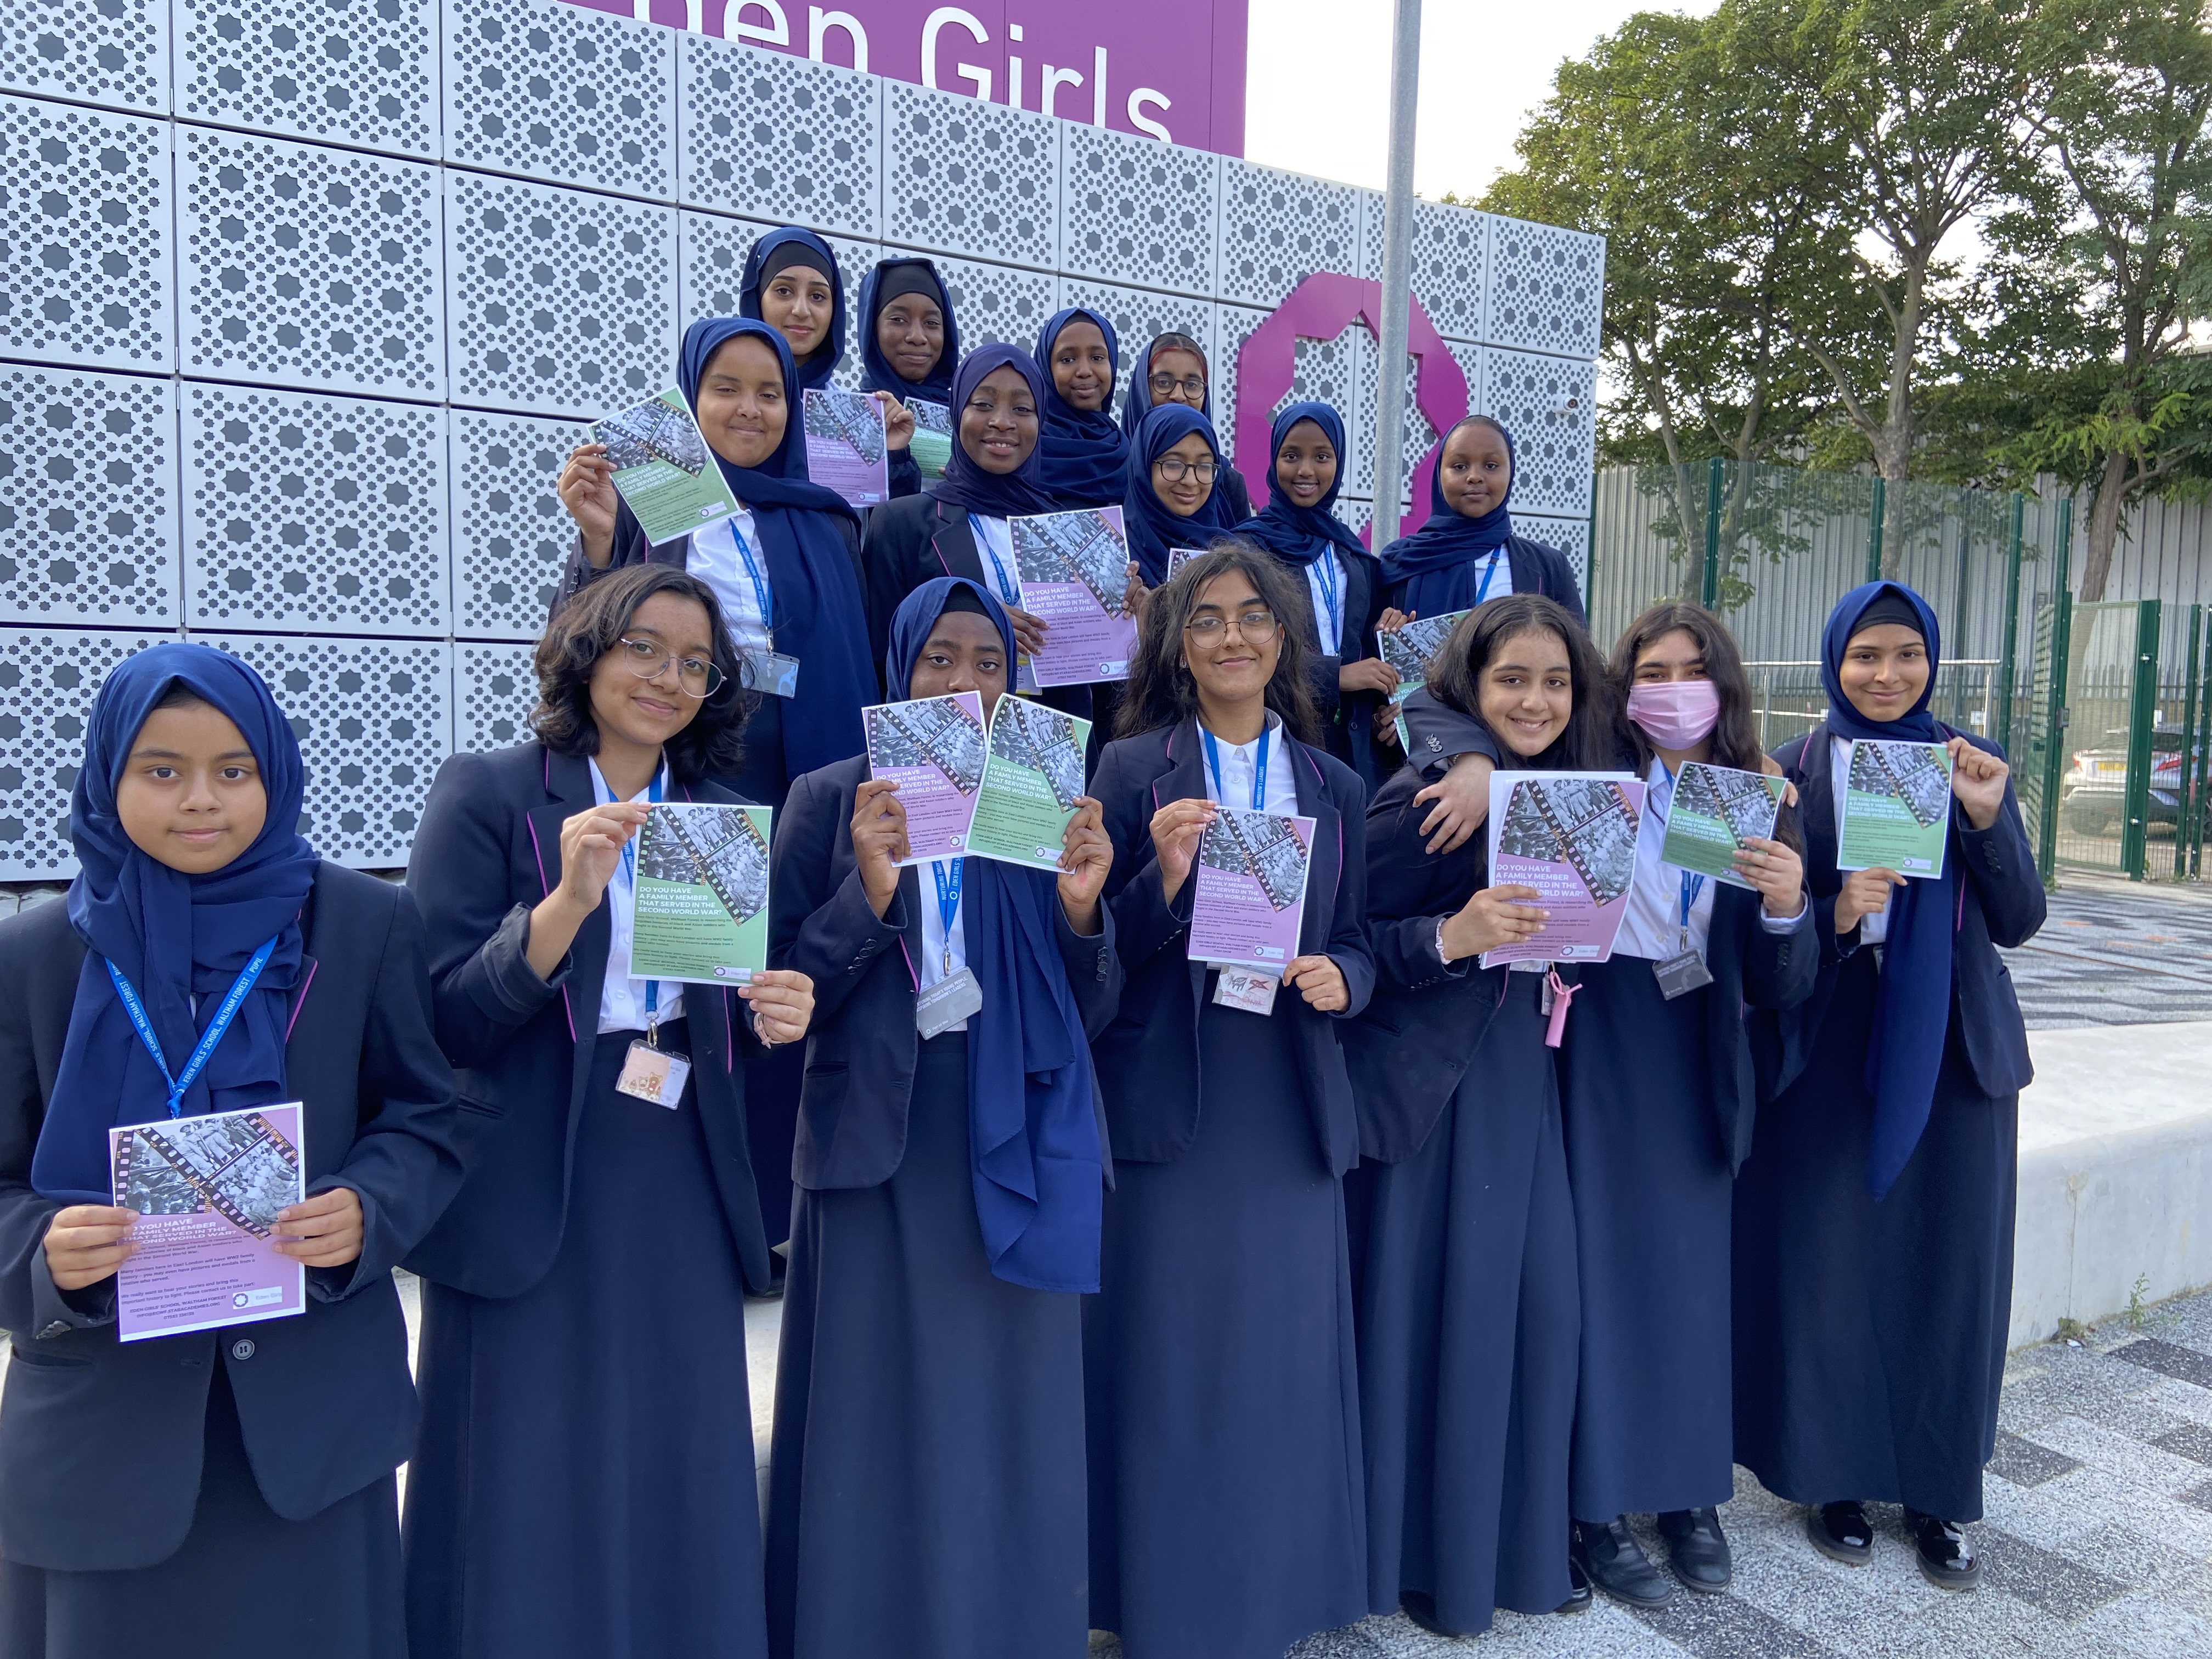 School girls gathering for a Remember Together event